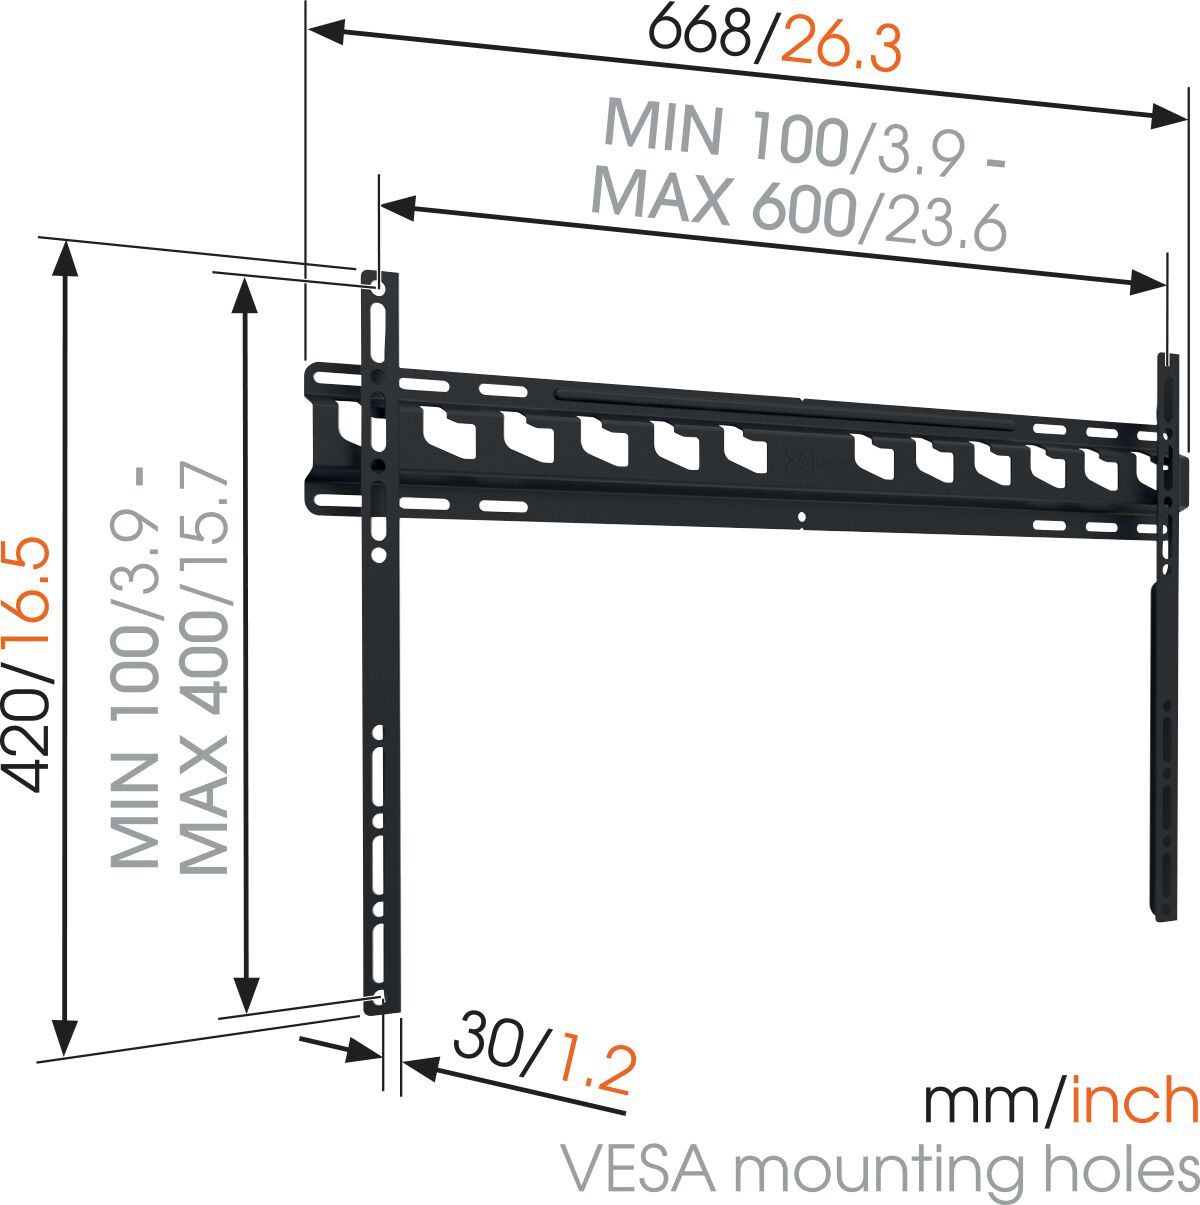 Vogel's MA4000 Fixed TV Wall Mount - Suitable for 40 up to 80 inch TVs up to Dimensions